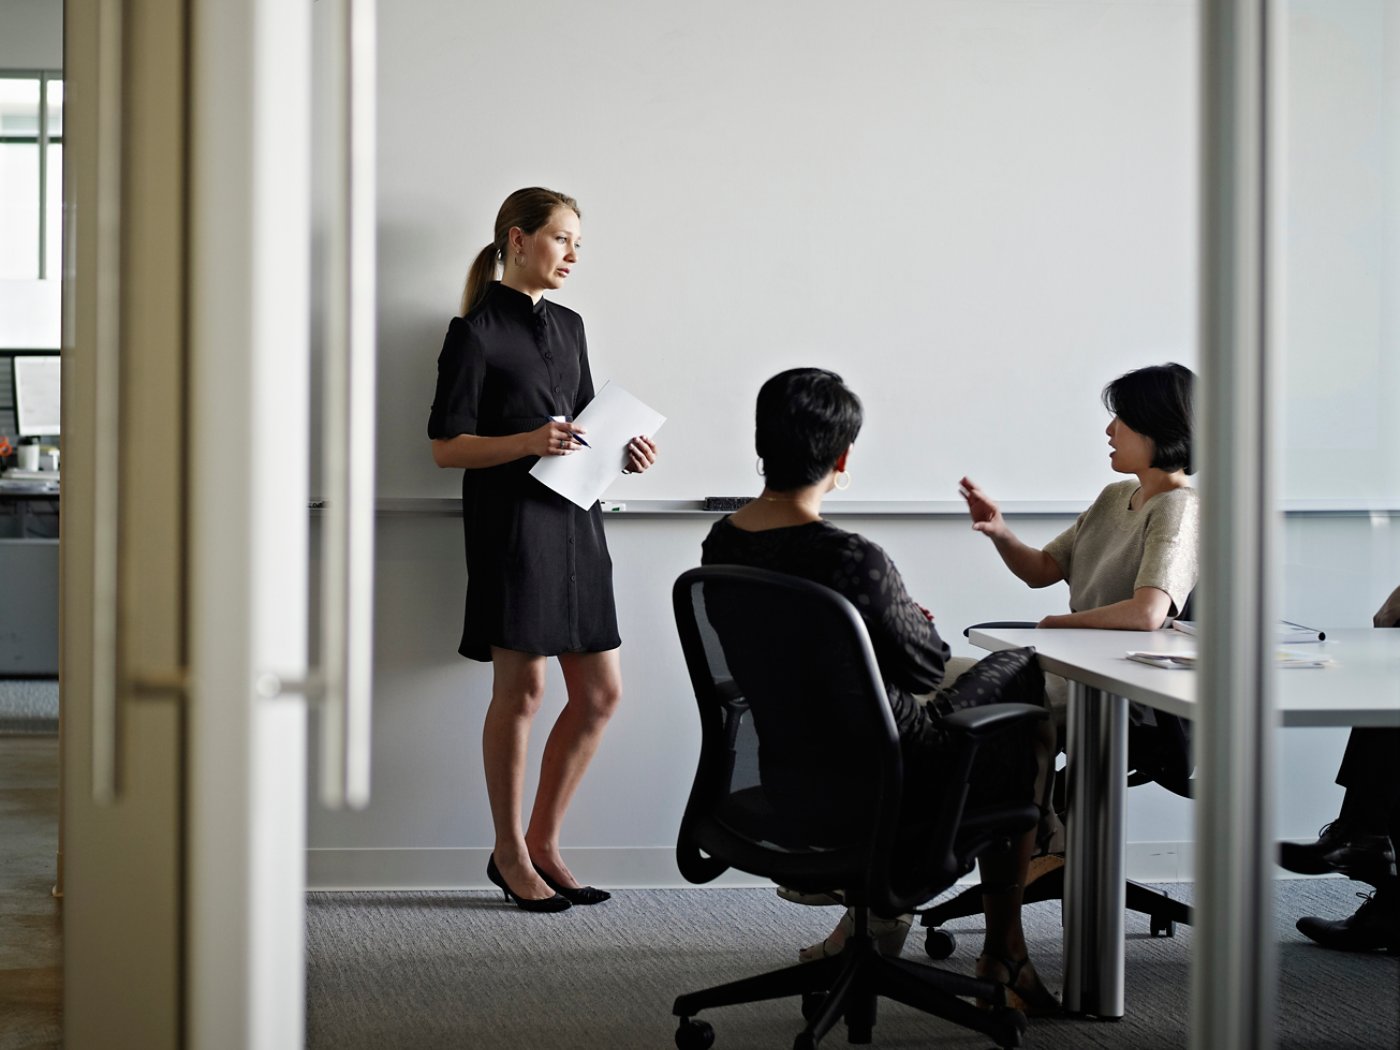 Businesswoman standing in conference room in discussion with coworkers